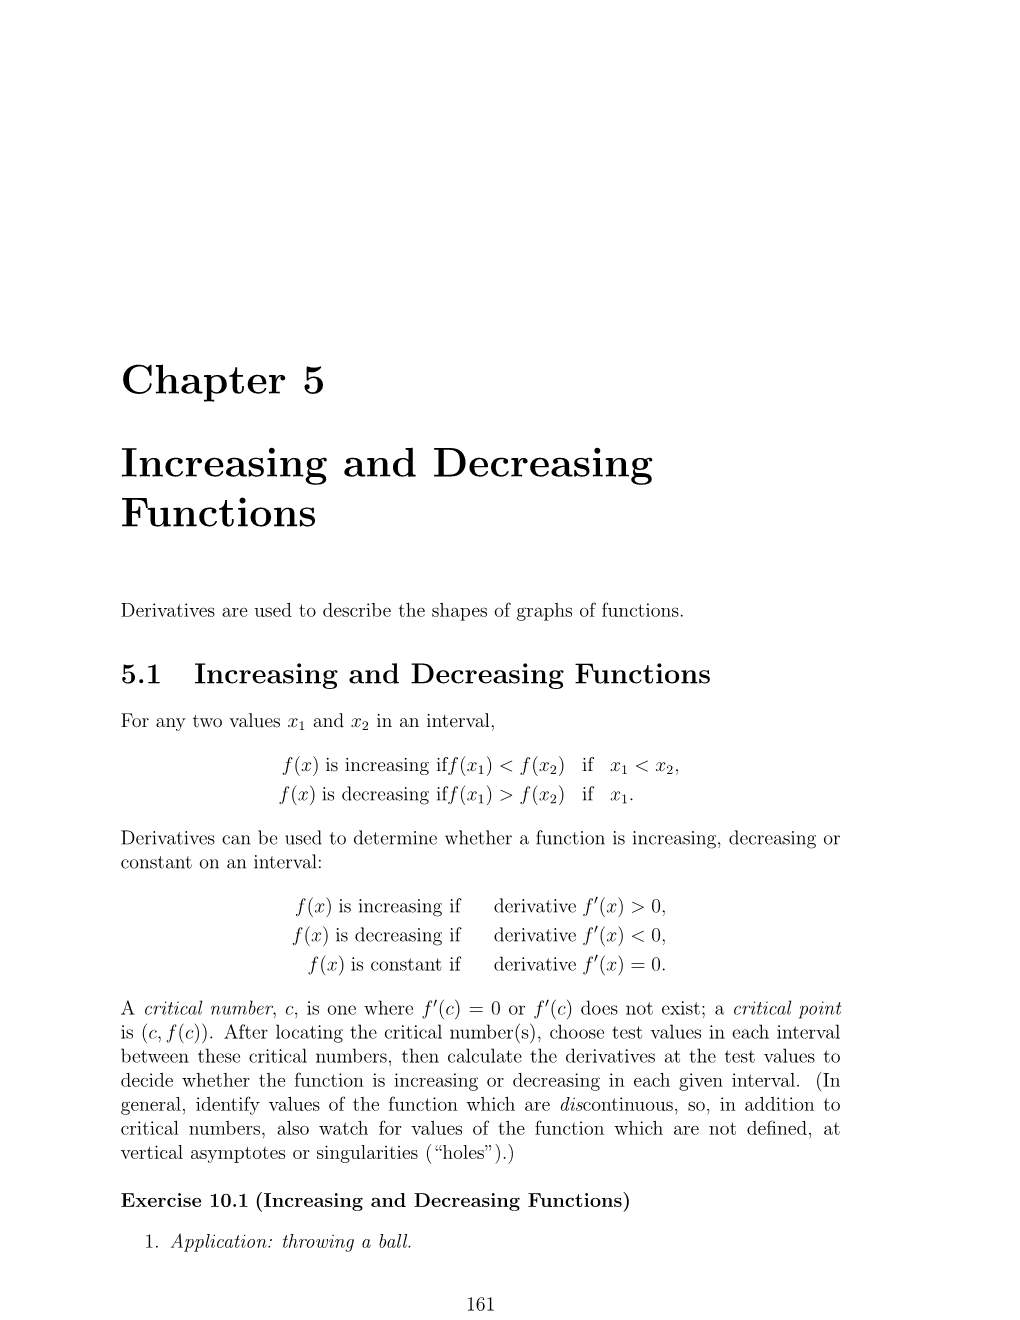 Chapter 5 Increasing and Decreasing Functions